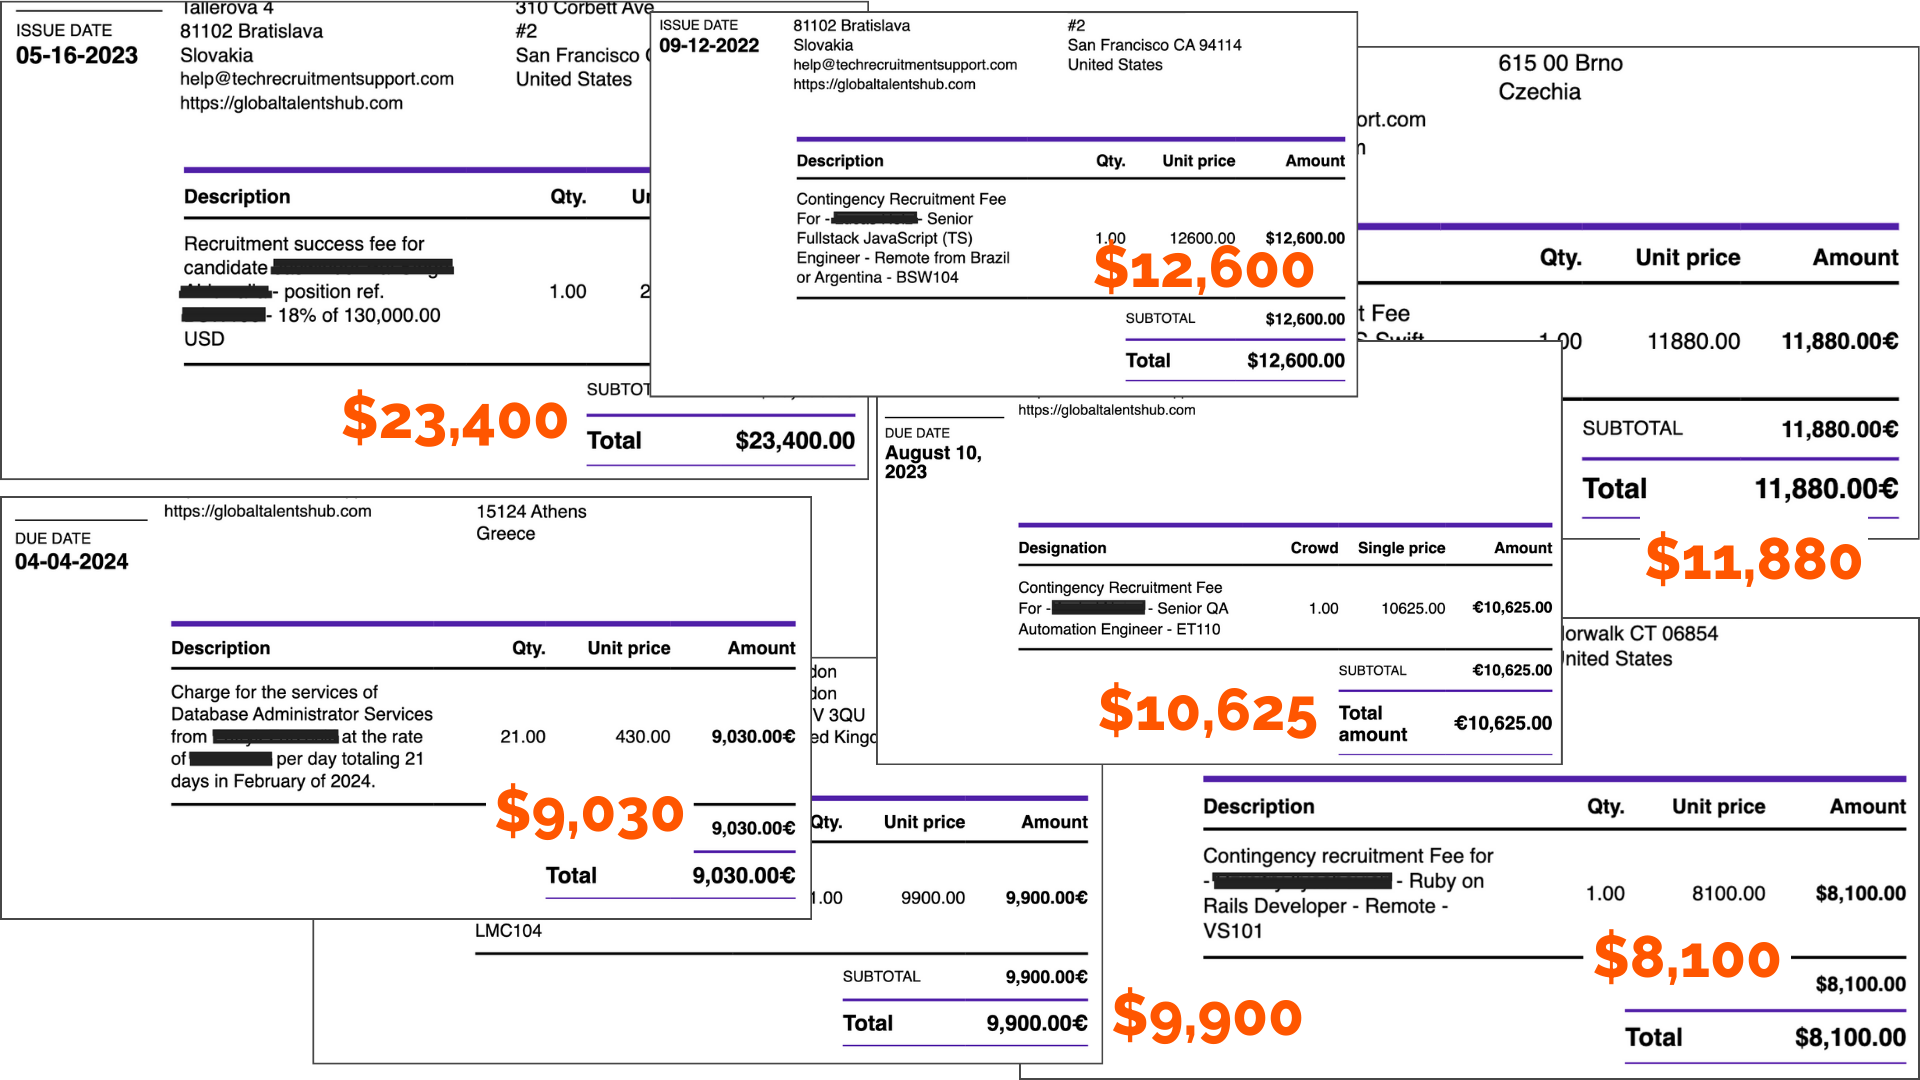 Invoices for recruiting services